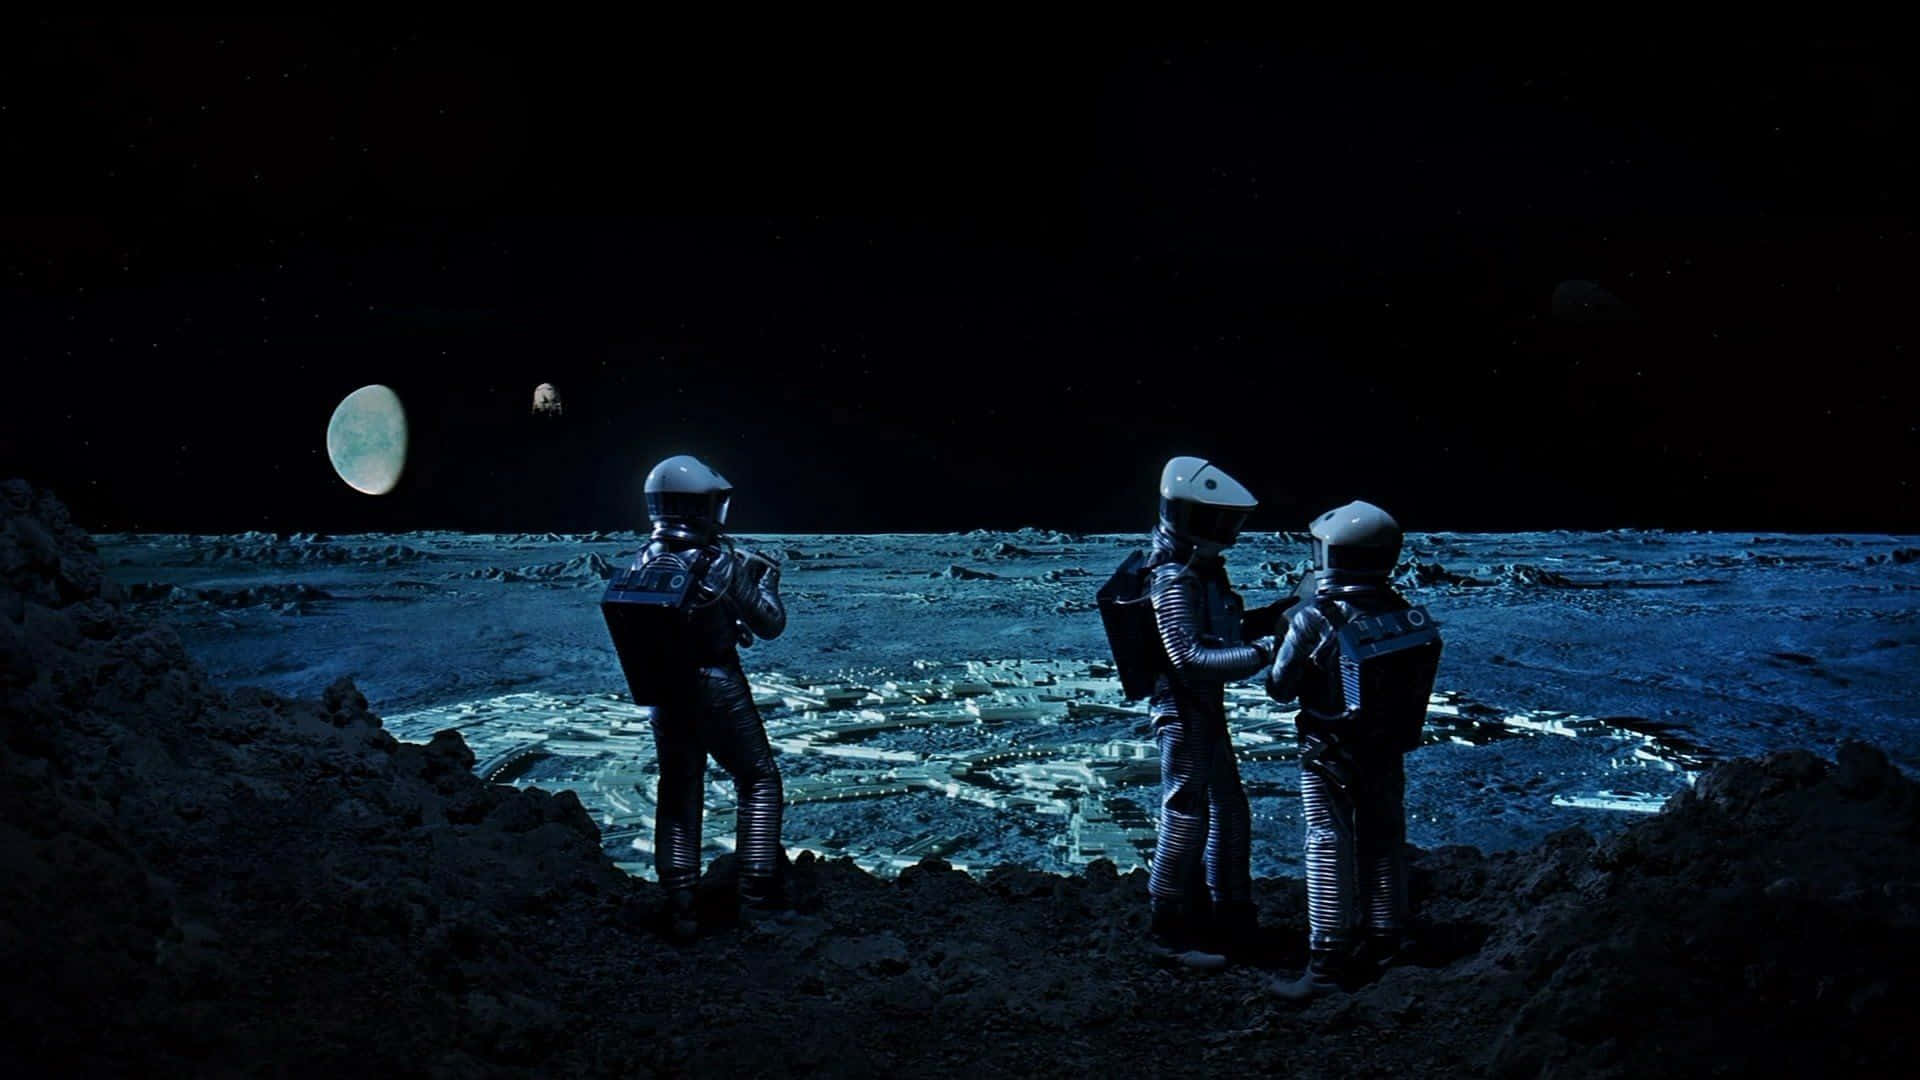 A scene from Stanley Kubrick's classic sci-fi film "2001: A Space Odyssey" Wallpaper